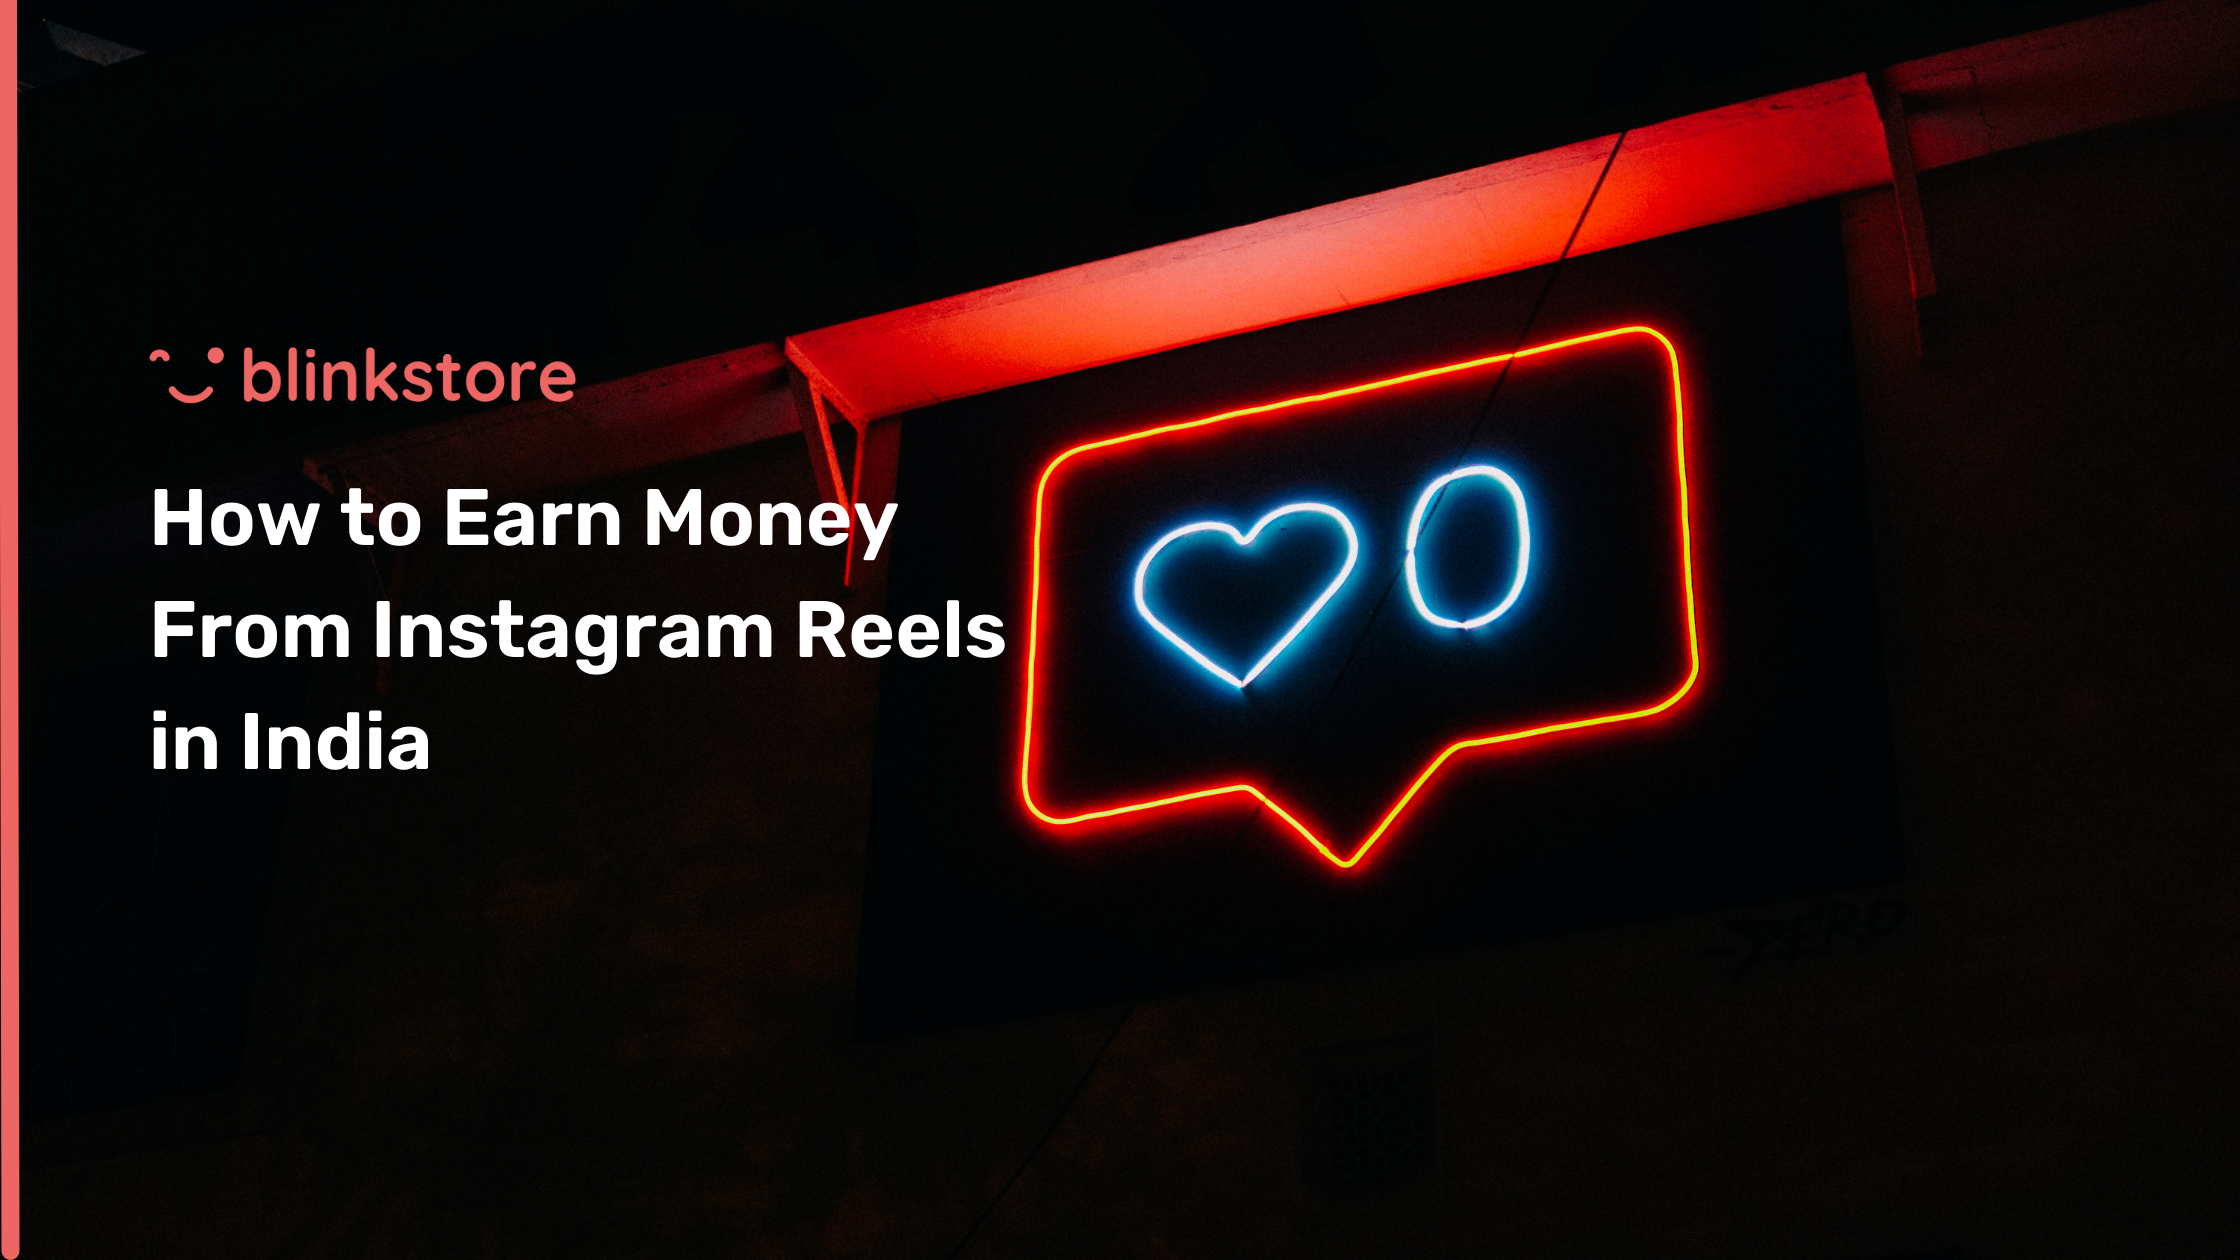 How to earn money from Instagram reels in India – 10 Ideas That Work